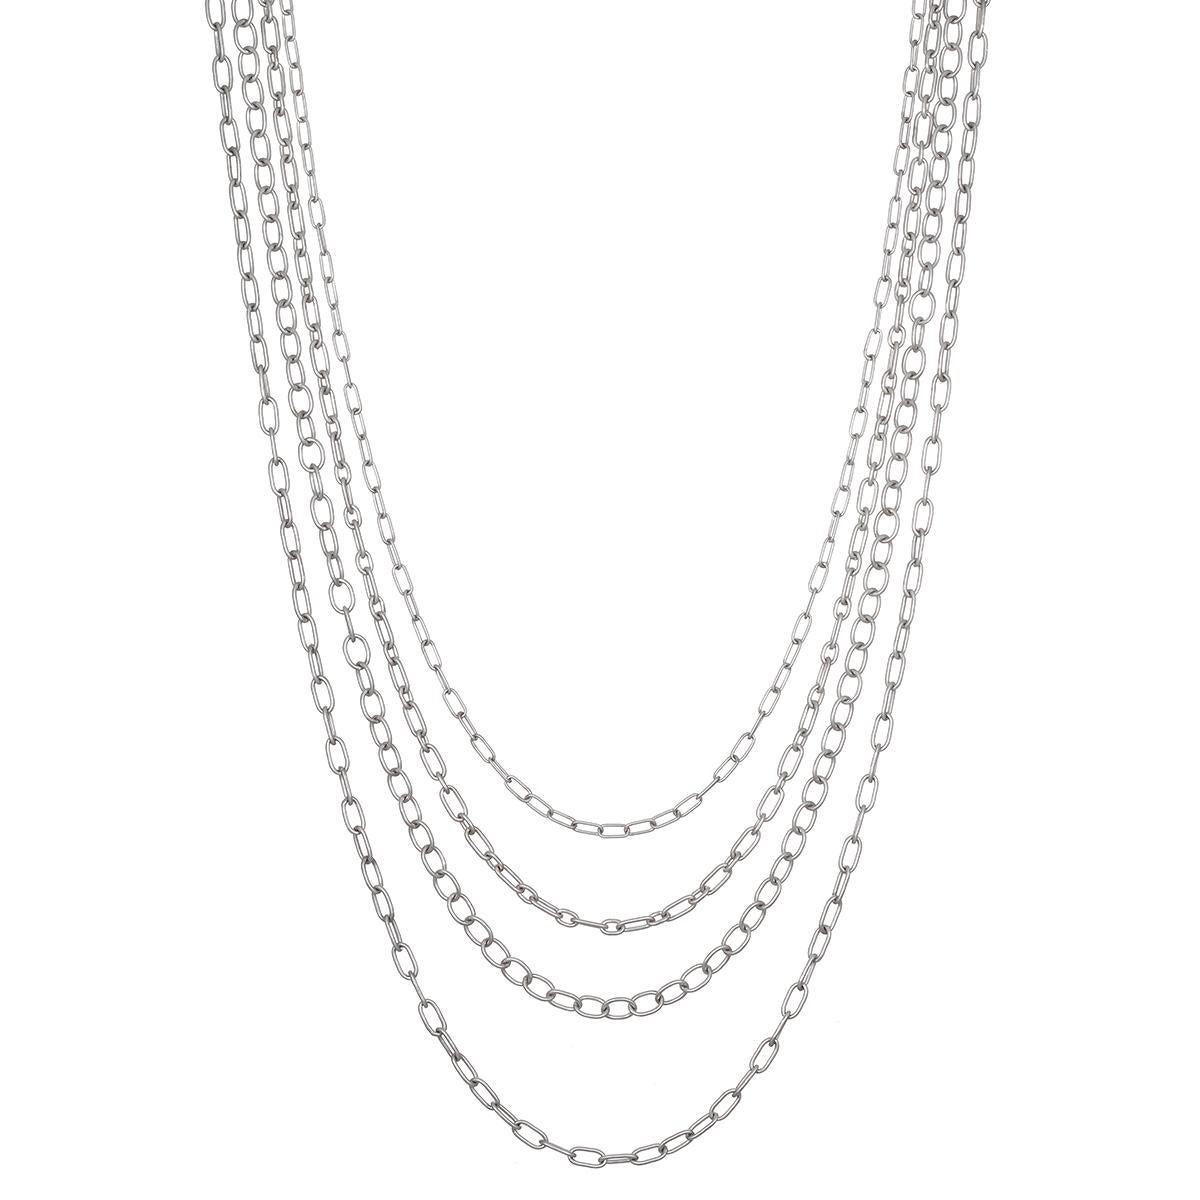 Classic and versatile, Faye Kim's Platinum Oval Link Chain is a must have for every jewelry wardrobe. This versatile piece can be worn alone or as a layering piece with other chains and/or a pendant. Matte finished.

Chain 23